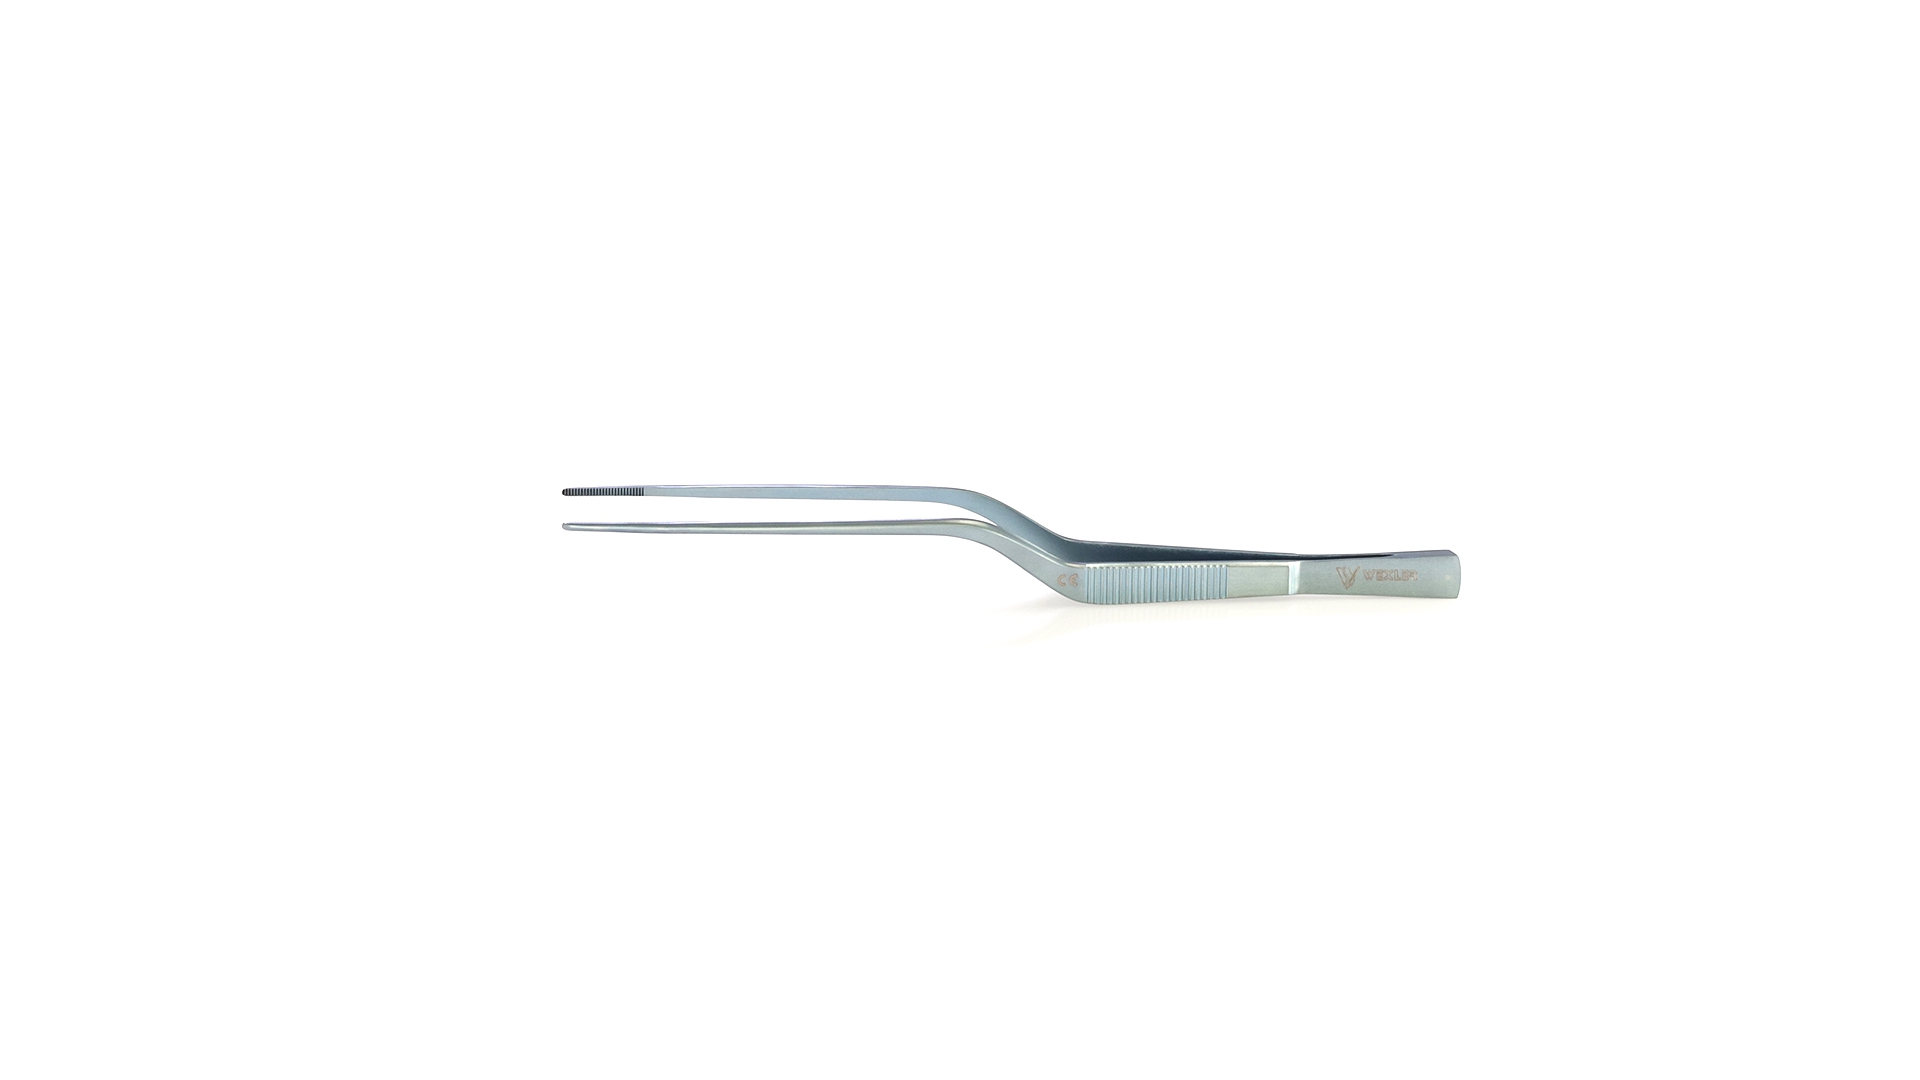 Cushing Dressing Forceps - Serrated tips with dissector end